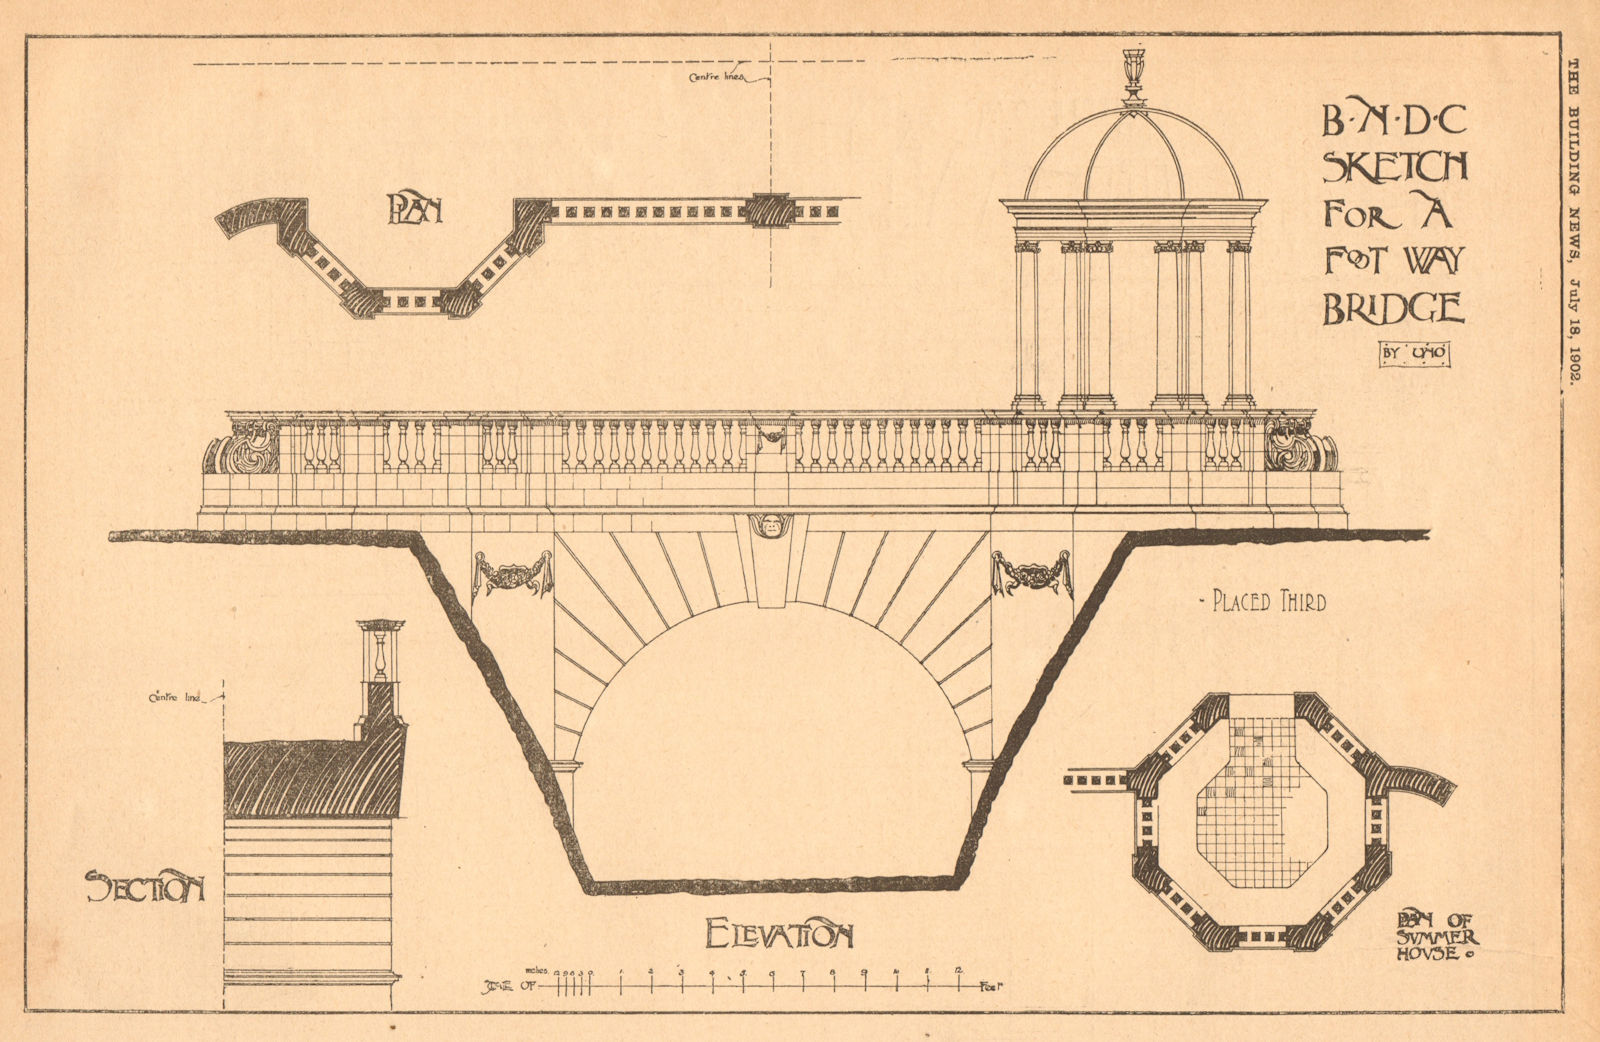 B.N.D.C Sketch for a foot way bridge by Uno. Summer house elevation & plans 1902